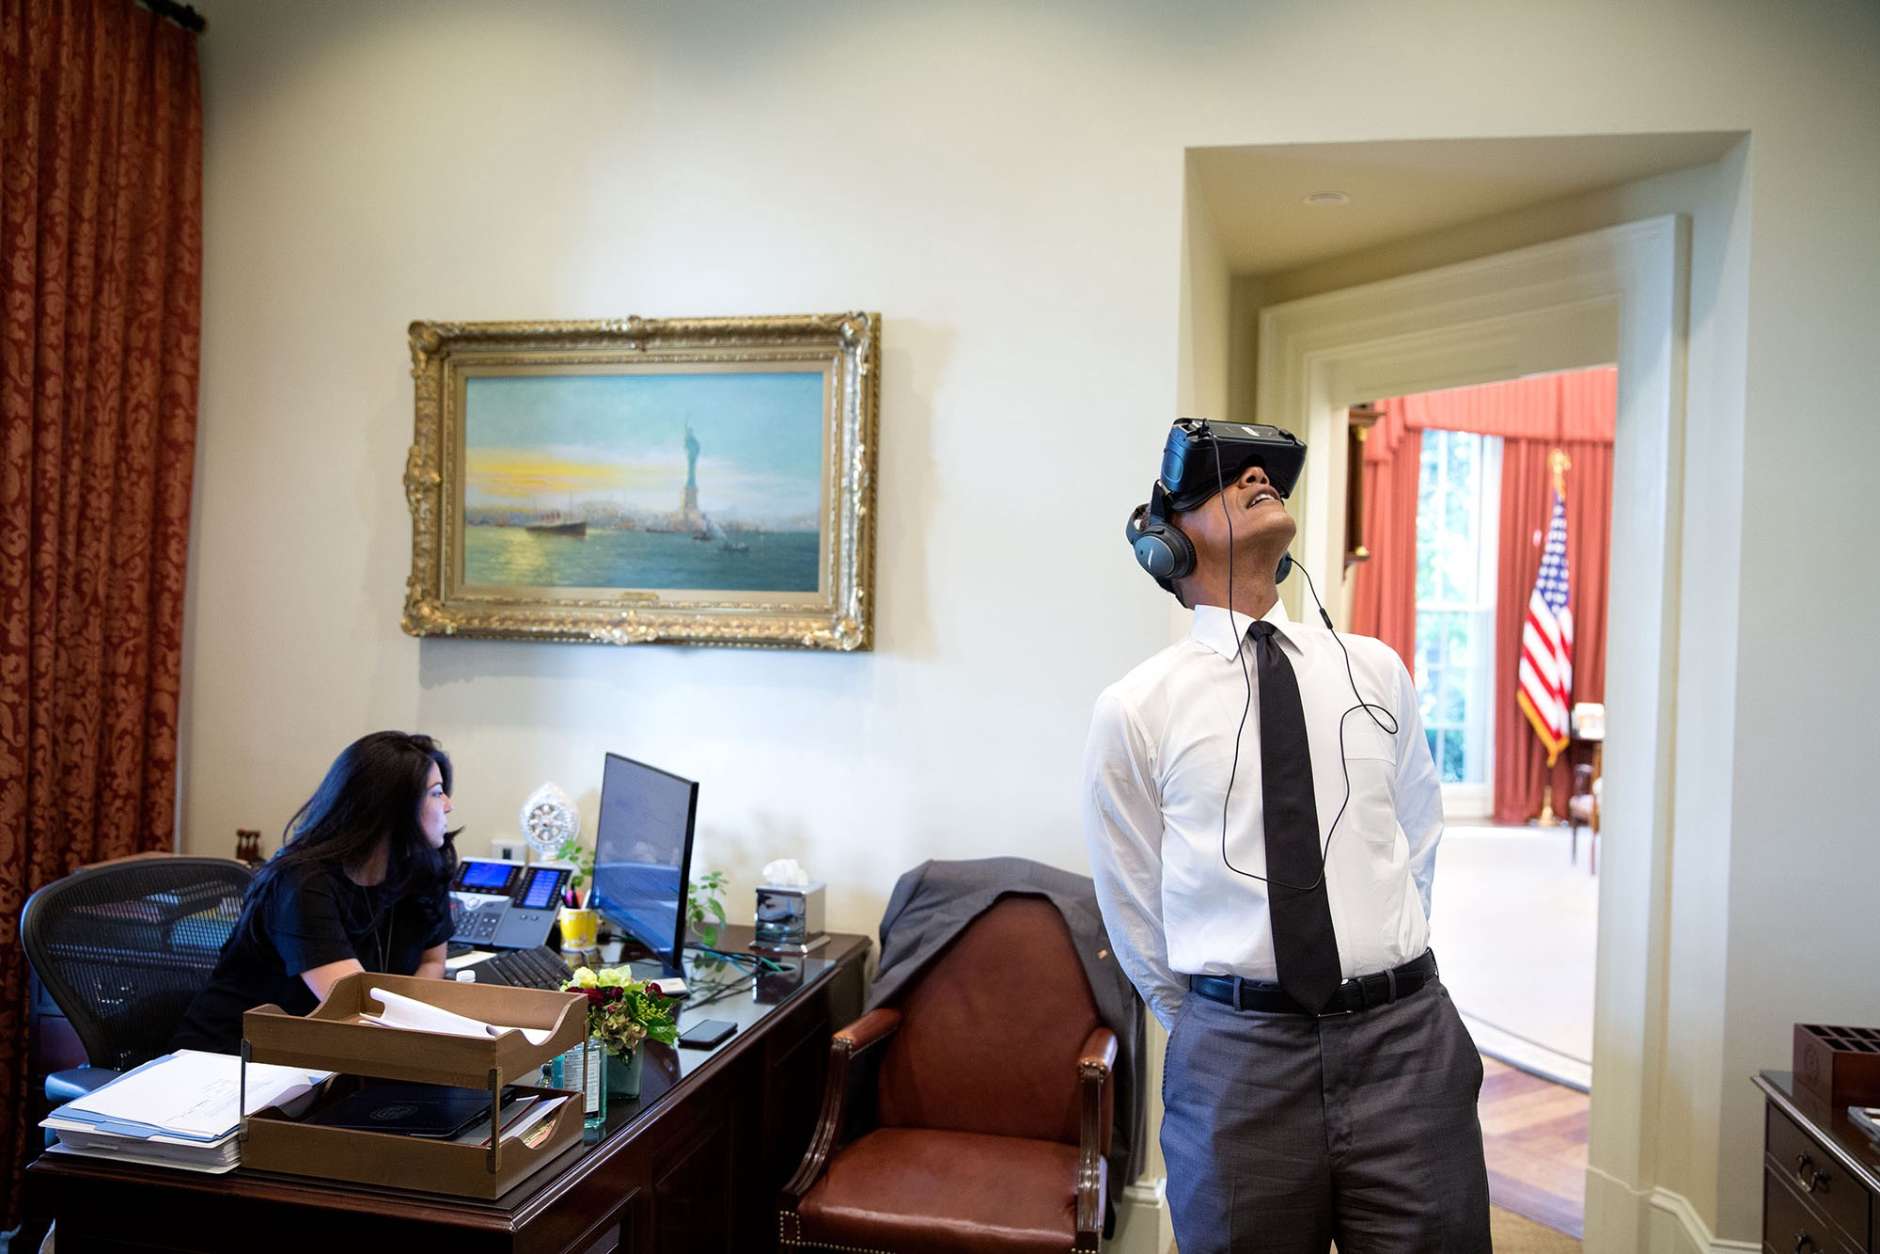 Aug. 24, 2016
“President Obama watches a virtual reality film captured during his trip to Yosemite National Park earlier this summer as Personal Aide Ferial Govashiri continues working at her computer.” (Official White House Photo by Pete Souza)